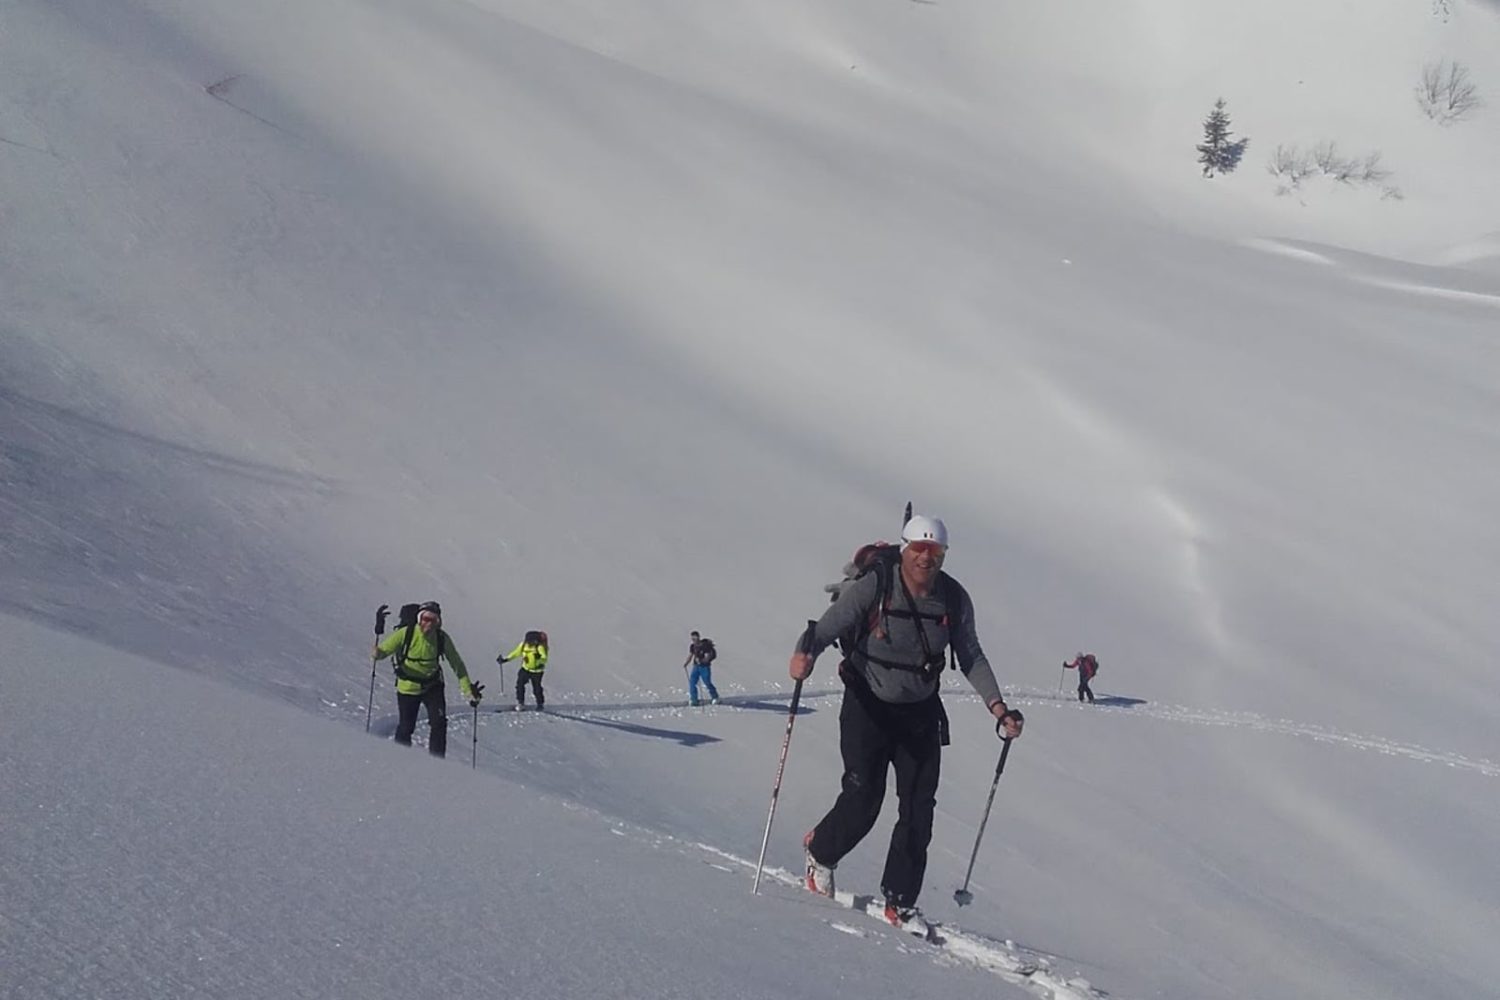 Ski touring from Bled